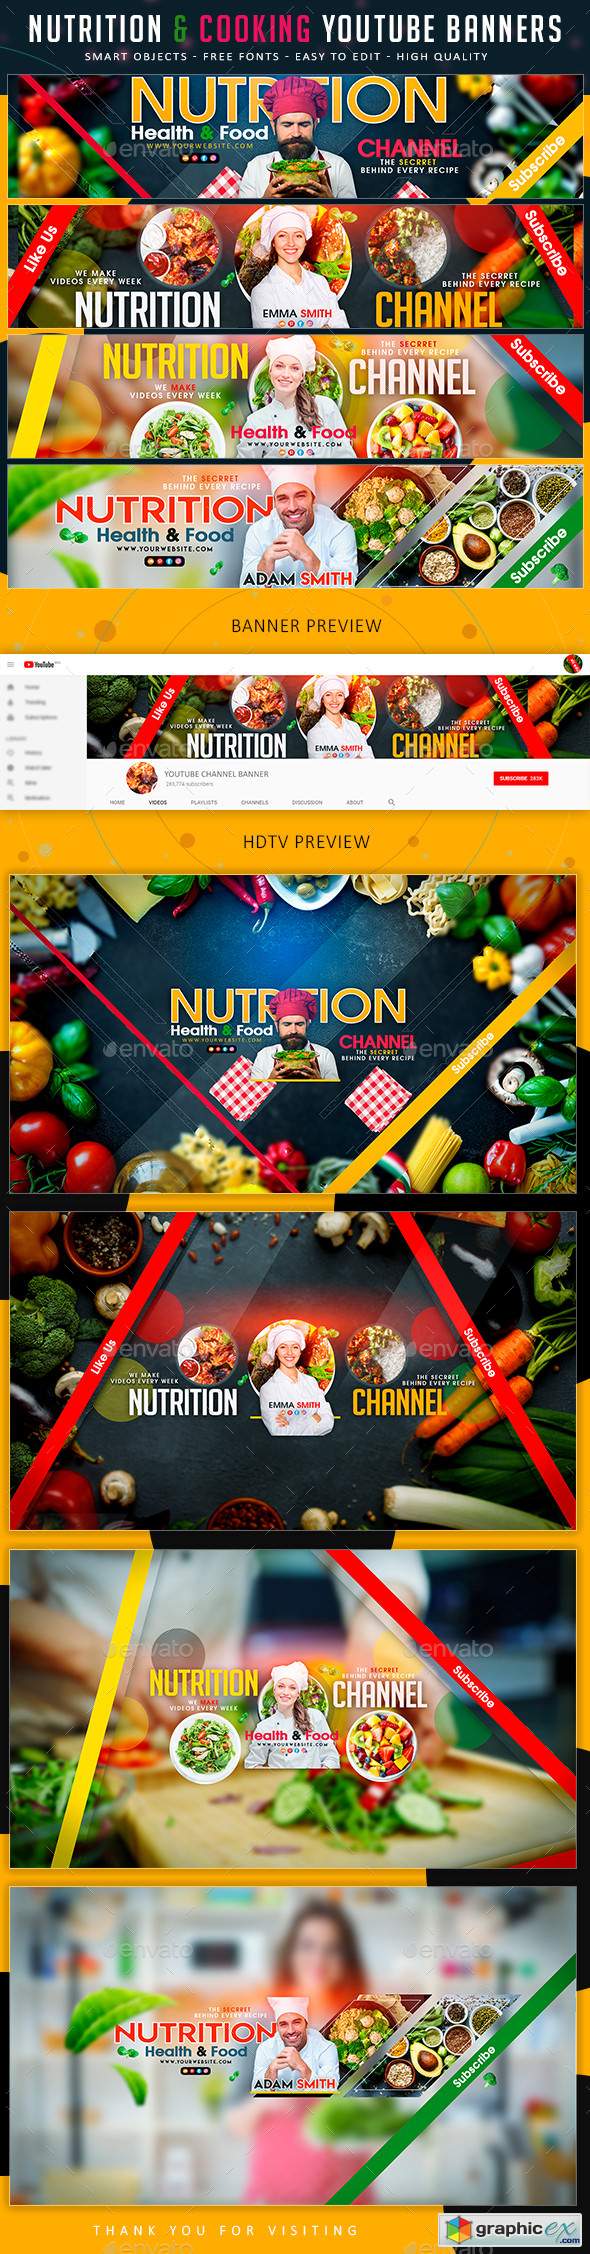 Nutrition & Cooking YouTube Banner